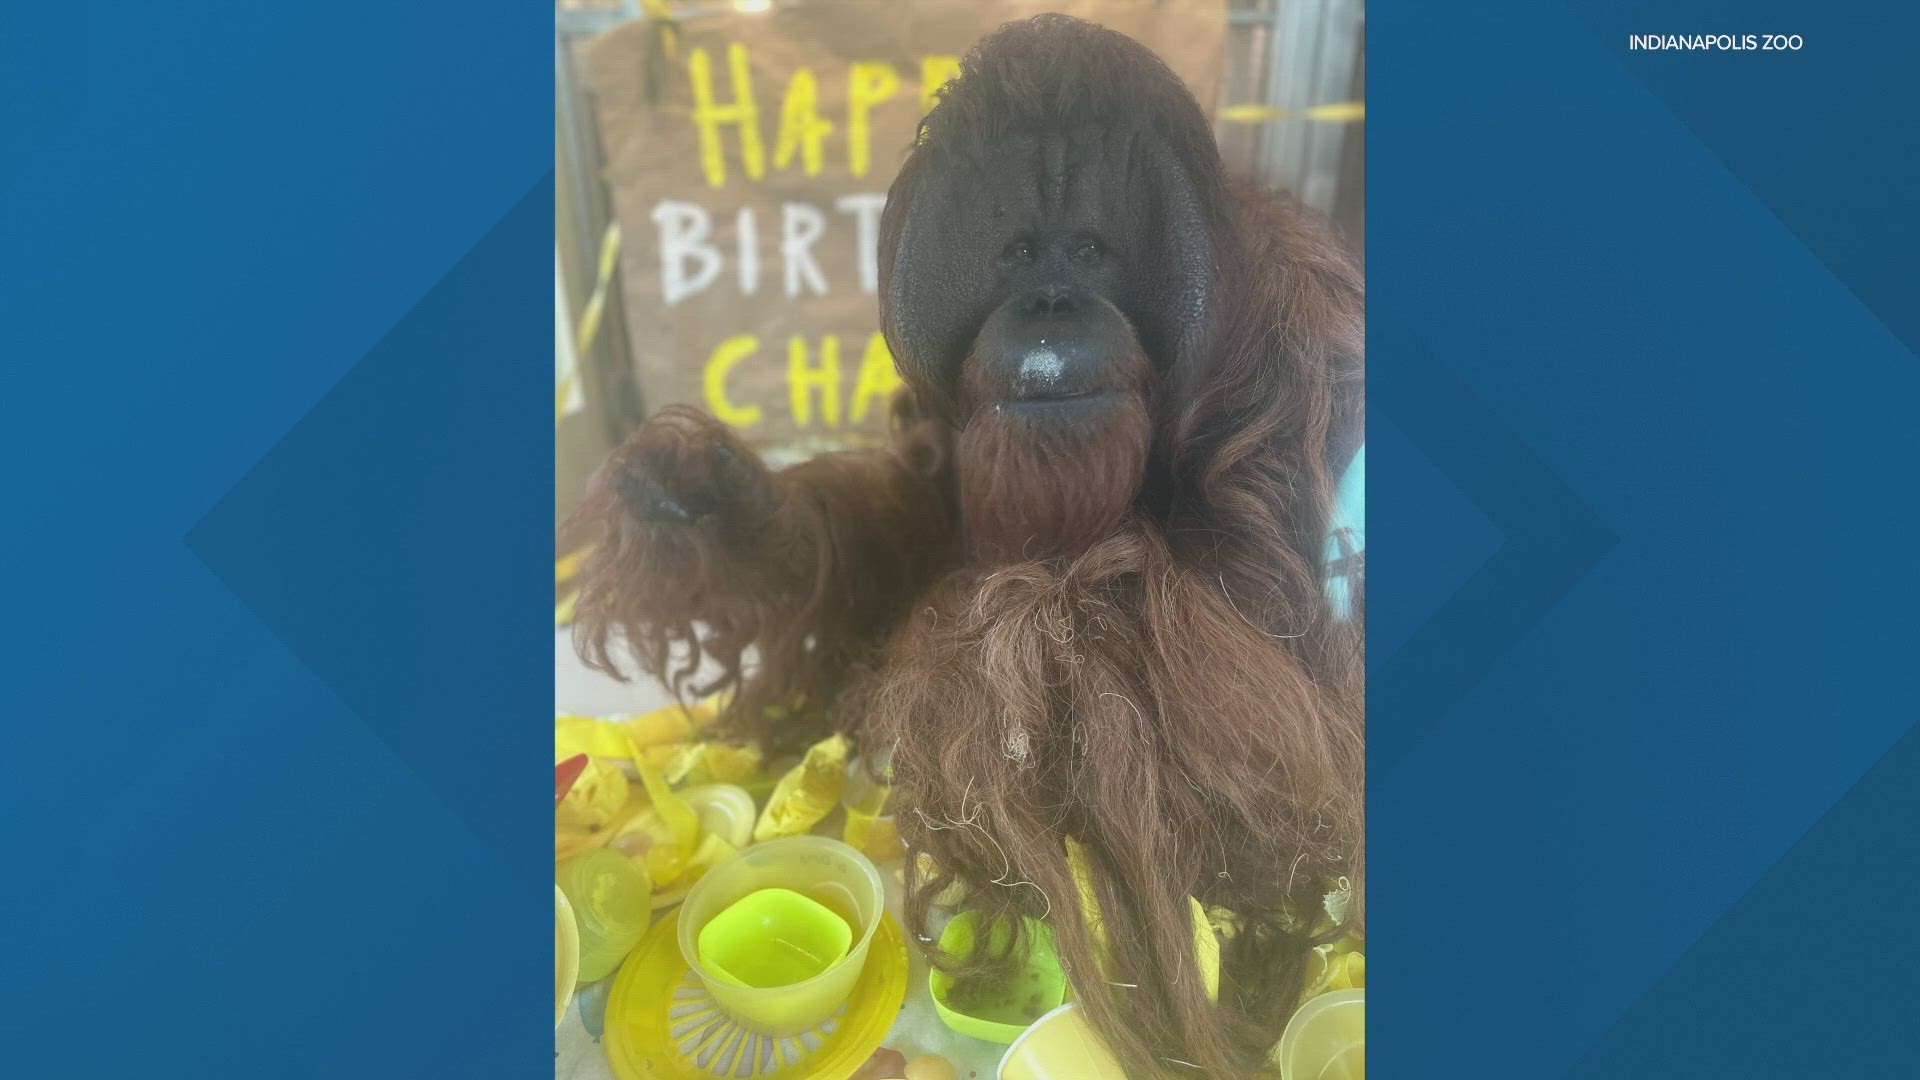 The zookeepers threw him a big party to celebrate complete with decorations wrapped presents and lots of treats.